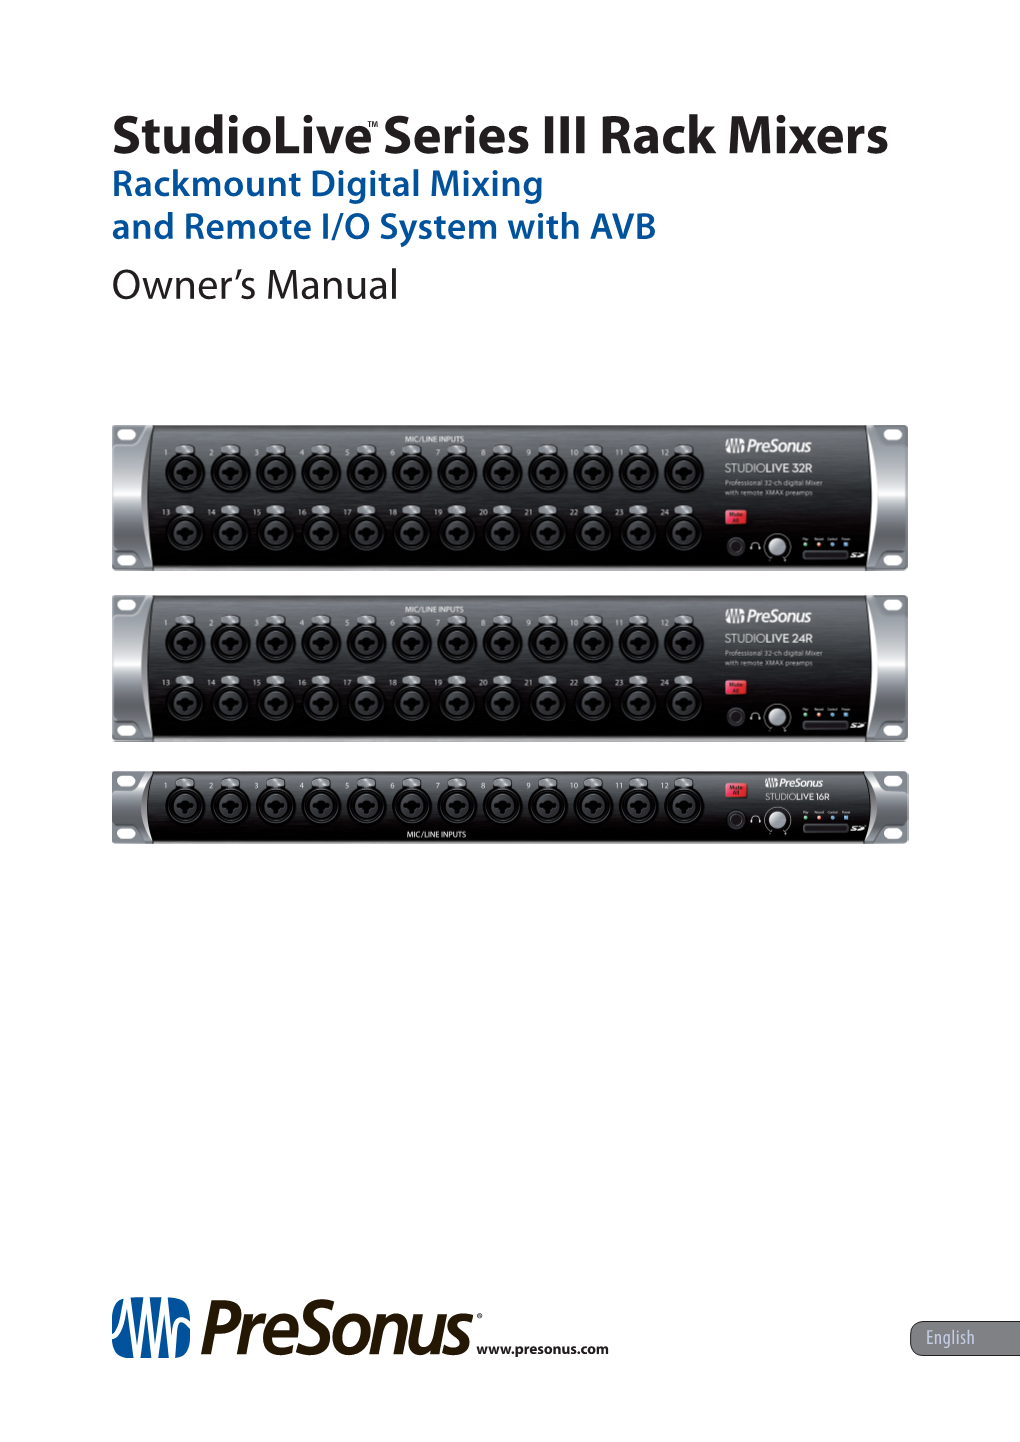 Studiolive™ Series III Rack Mixers Rackmount Digital Mixing and Remote I/O System with AVB Owner’S Manual